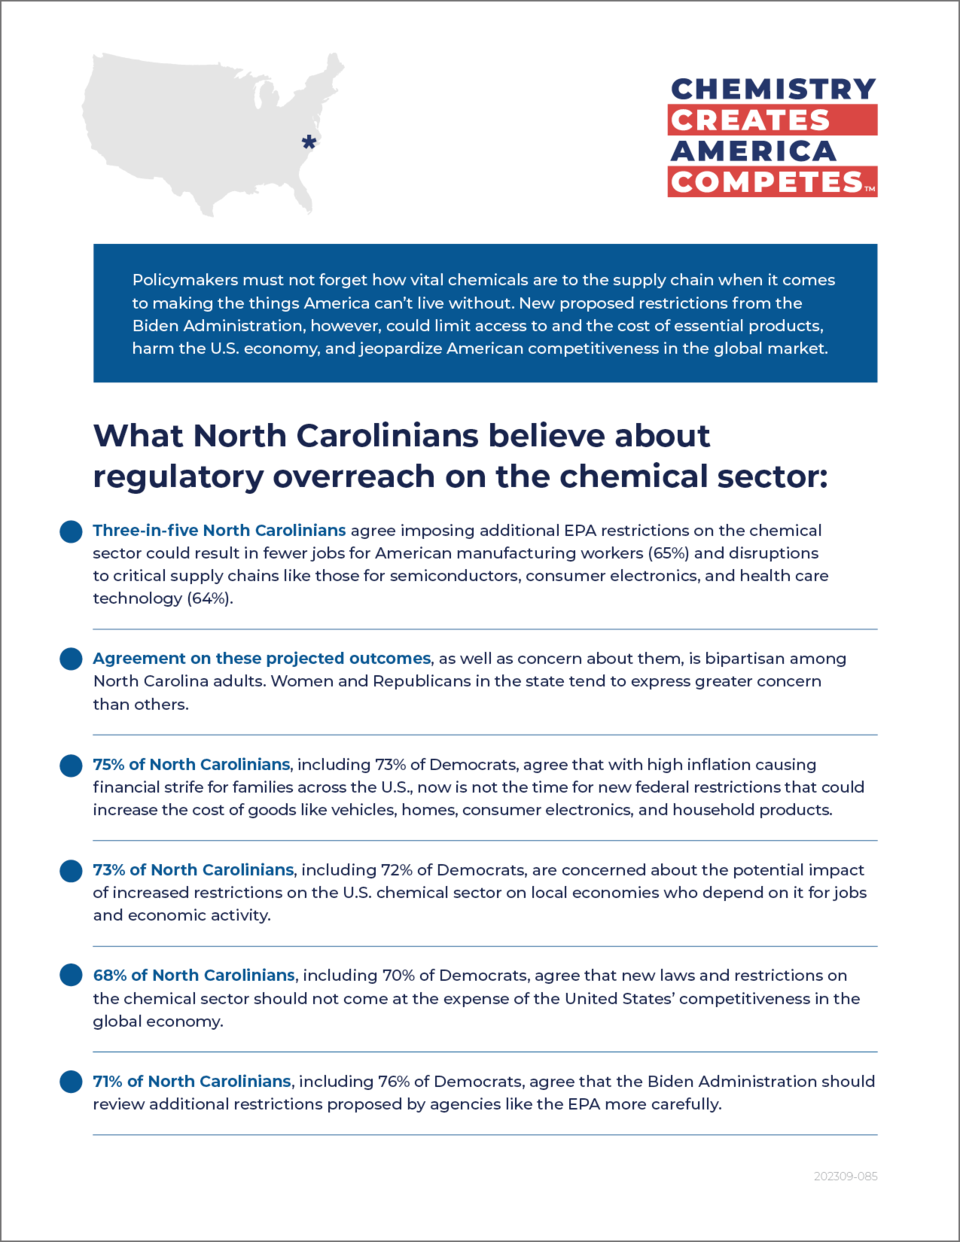 What North Carolinians Believe About Regulatory Overreach on Chemical Sector - Fact Sheet